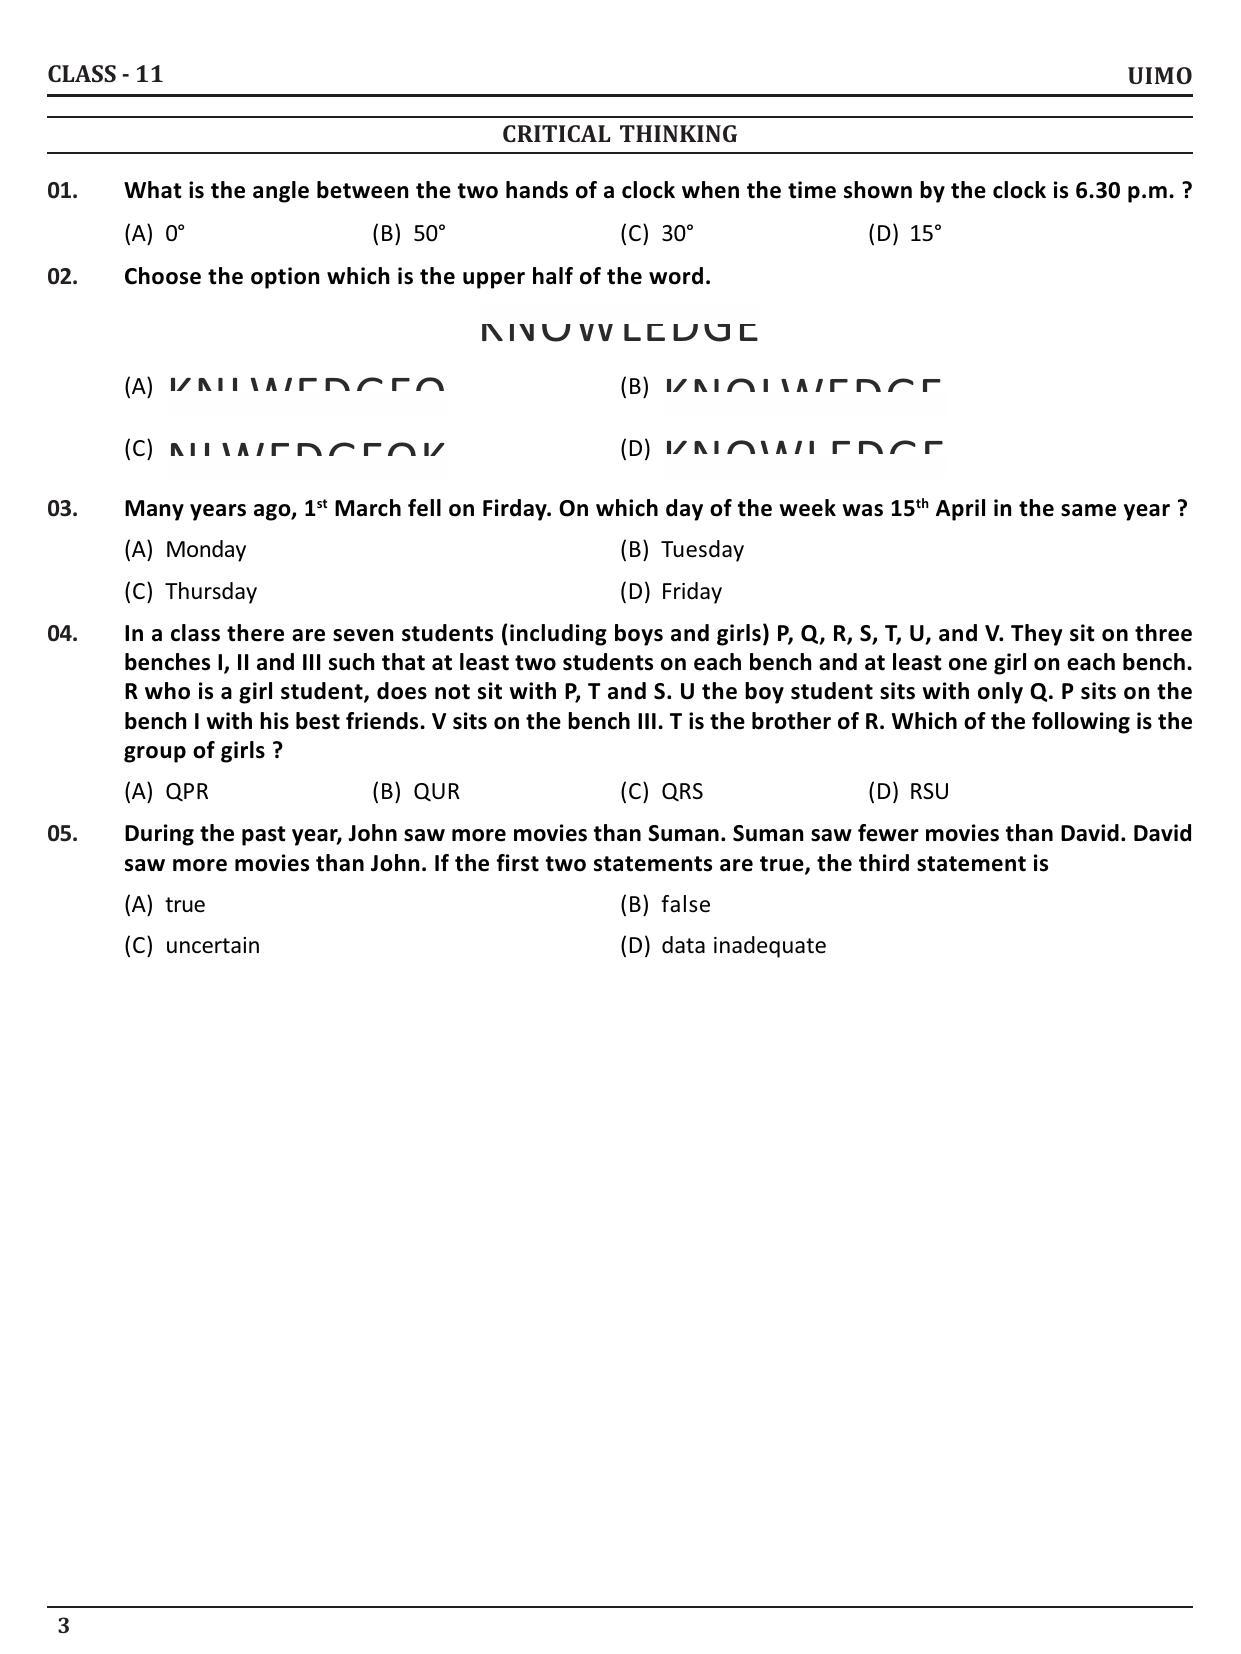 UIMO Class 11 2023 Sample Paper - Page 3